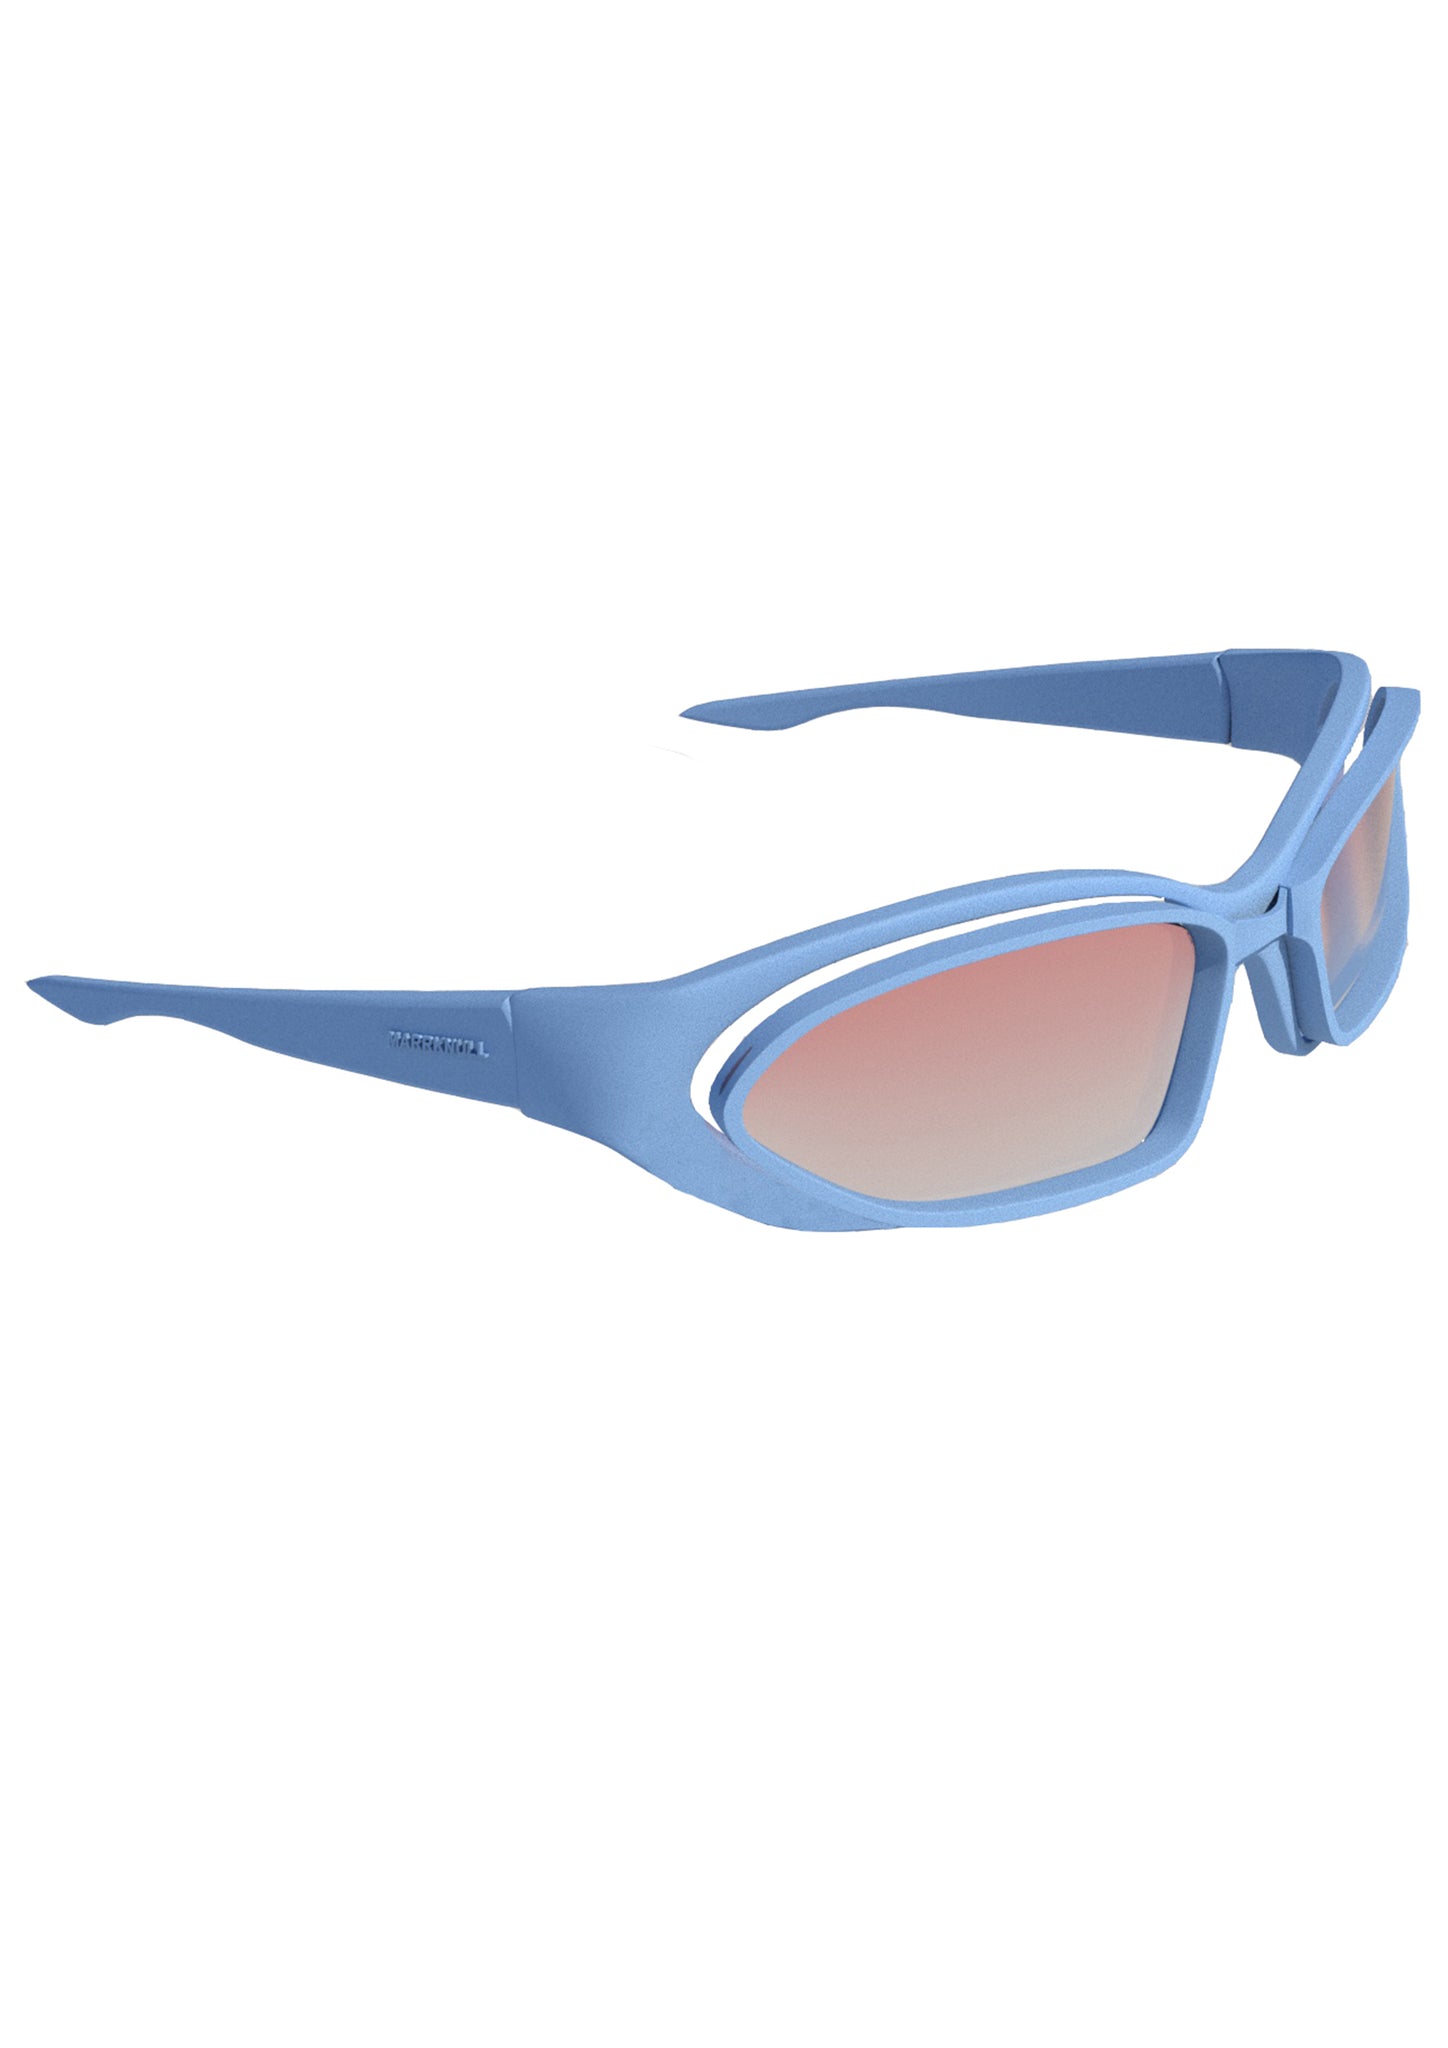 SOFT PEOPLE AREA JOINTLY-DESIGNED DOUBLE RIM SUNGLASSES BLUE